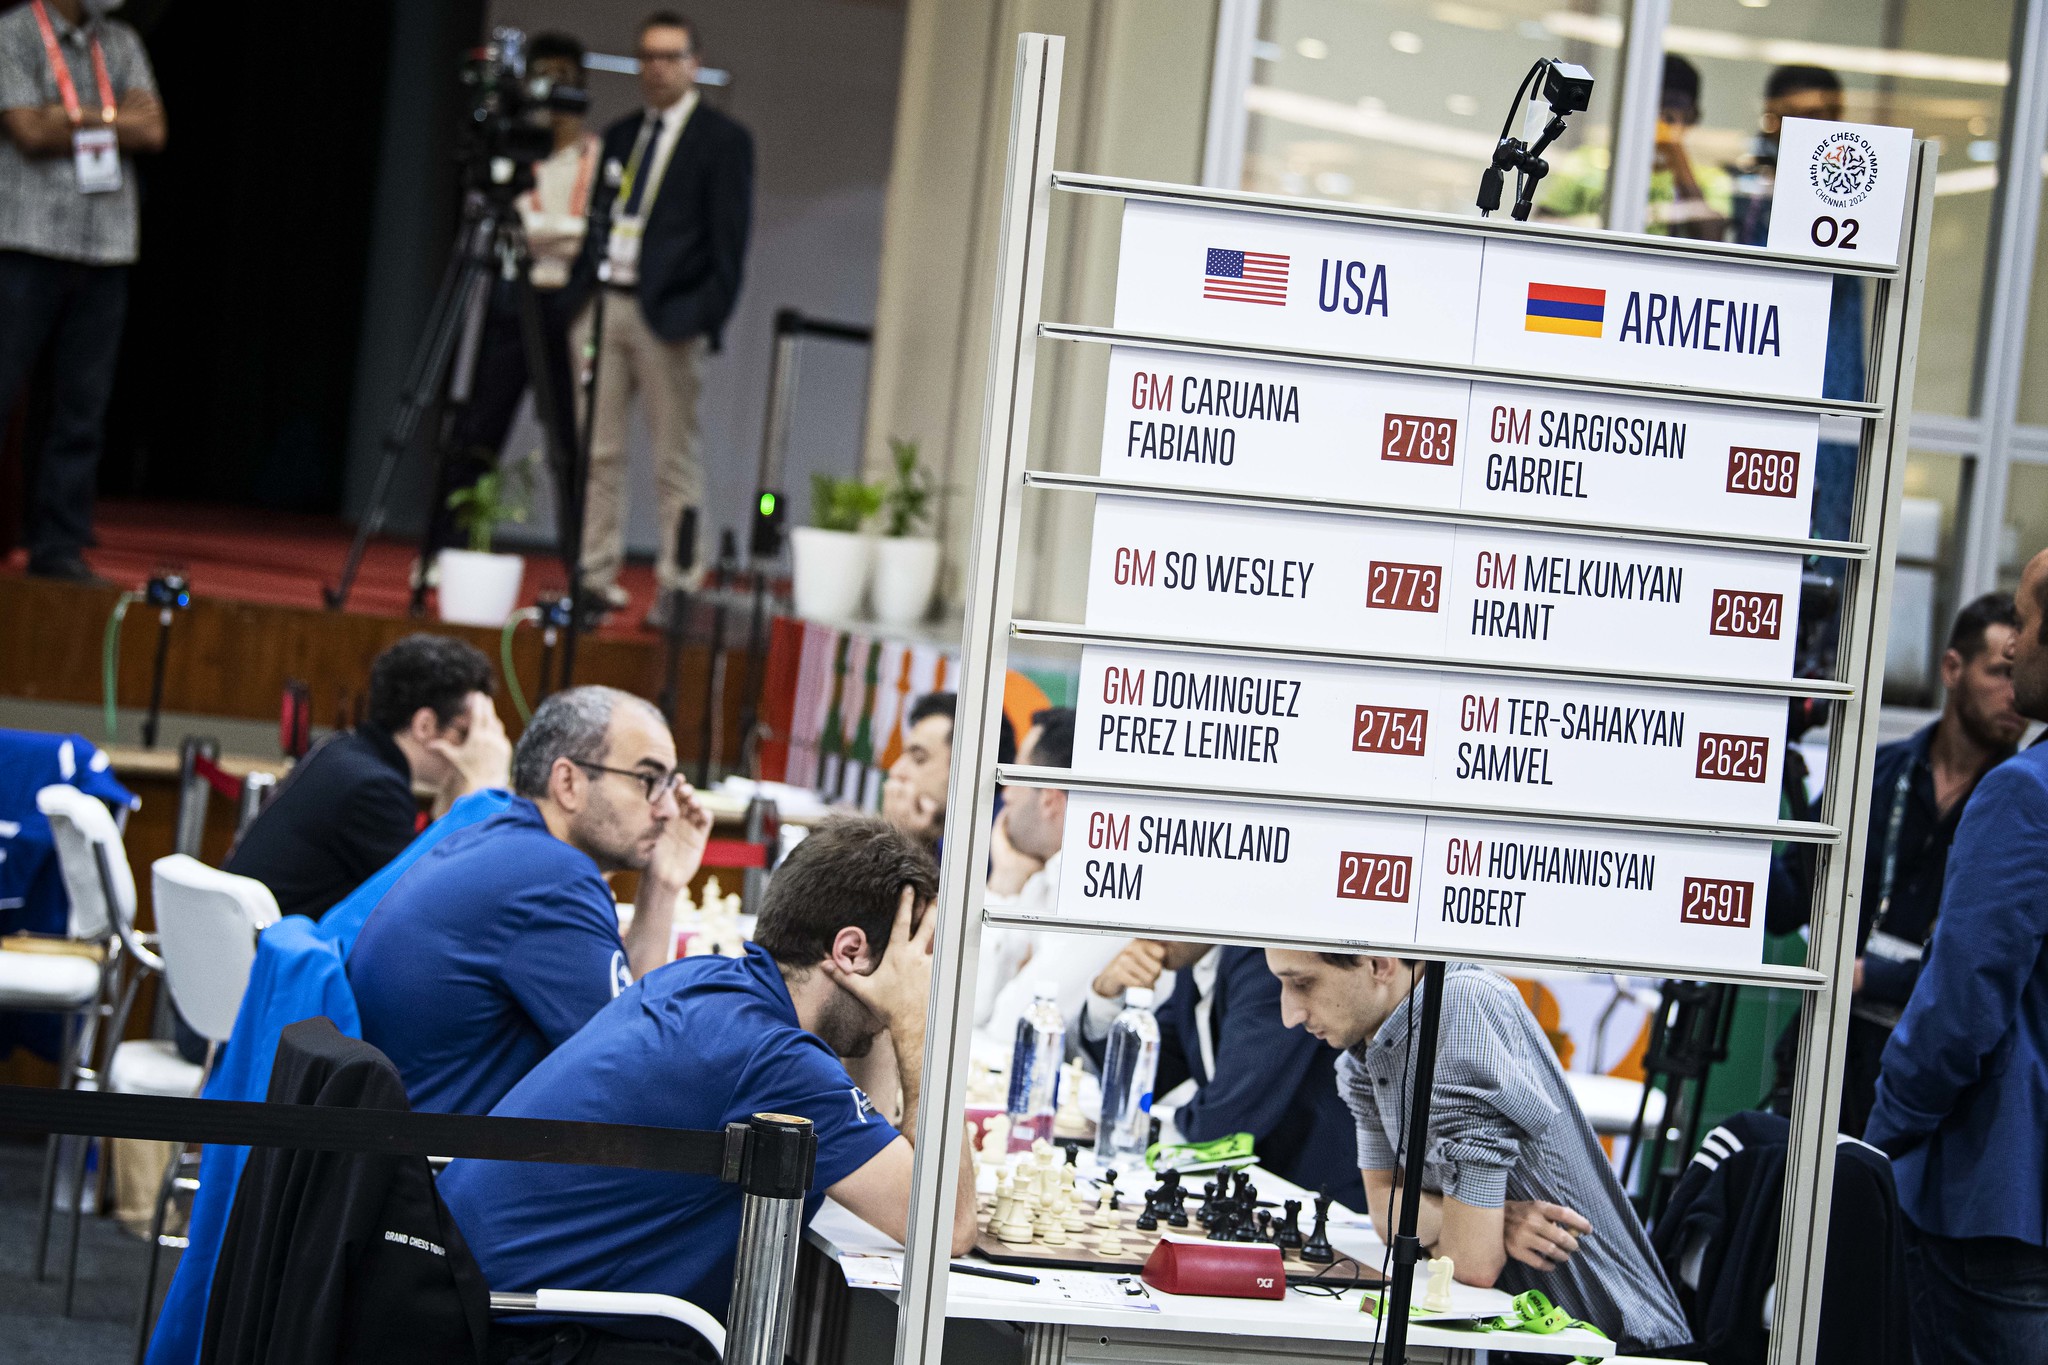 FIDE on Instagram: Day 1 saw one of the final leg of the #FIDEGrandPrix  draw and one win in each pool. Aronian, Dominguez, Predke and Vitiugov left  the playing hall with a